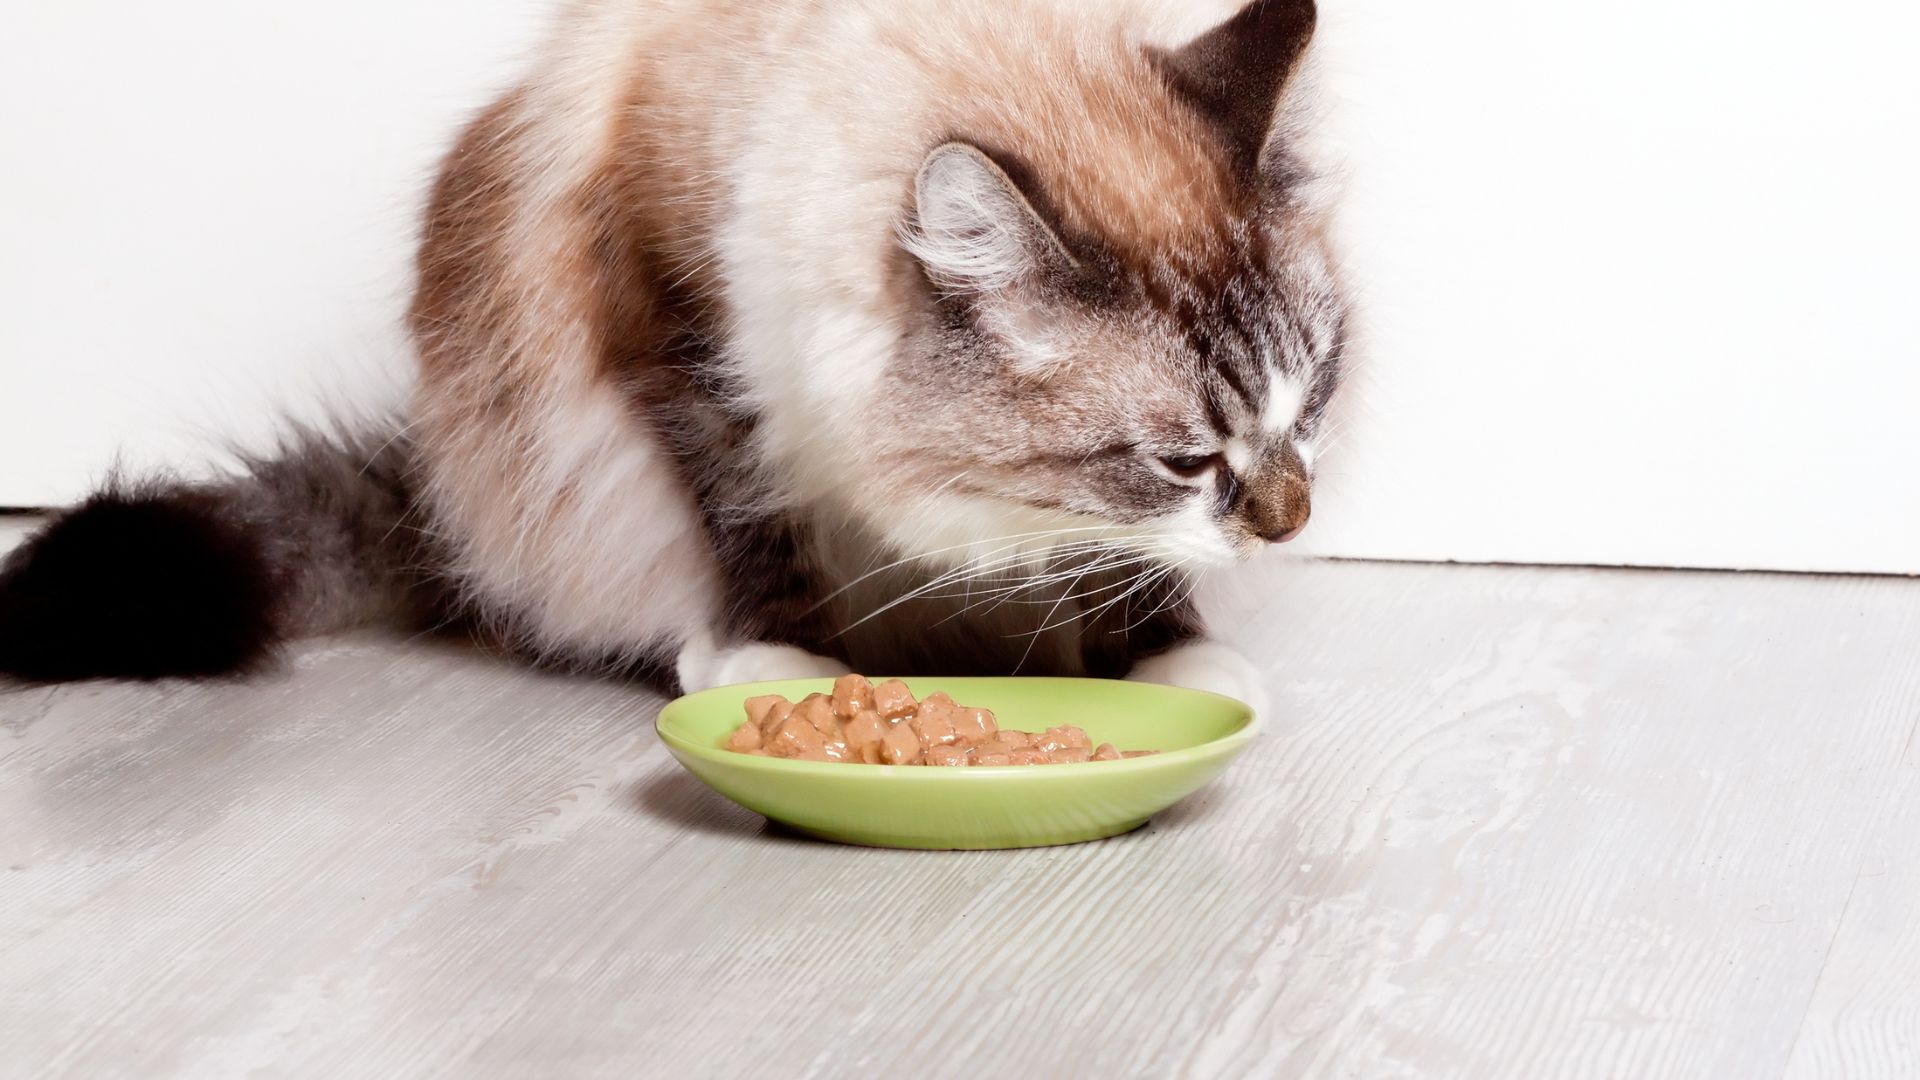 Do You Want To Know More About Cat Nutrition?